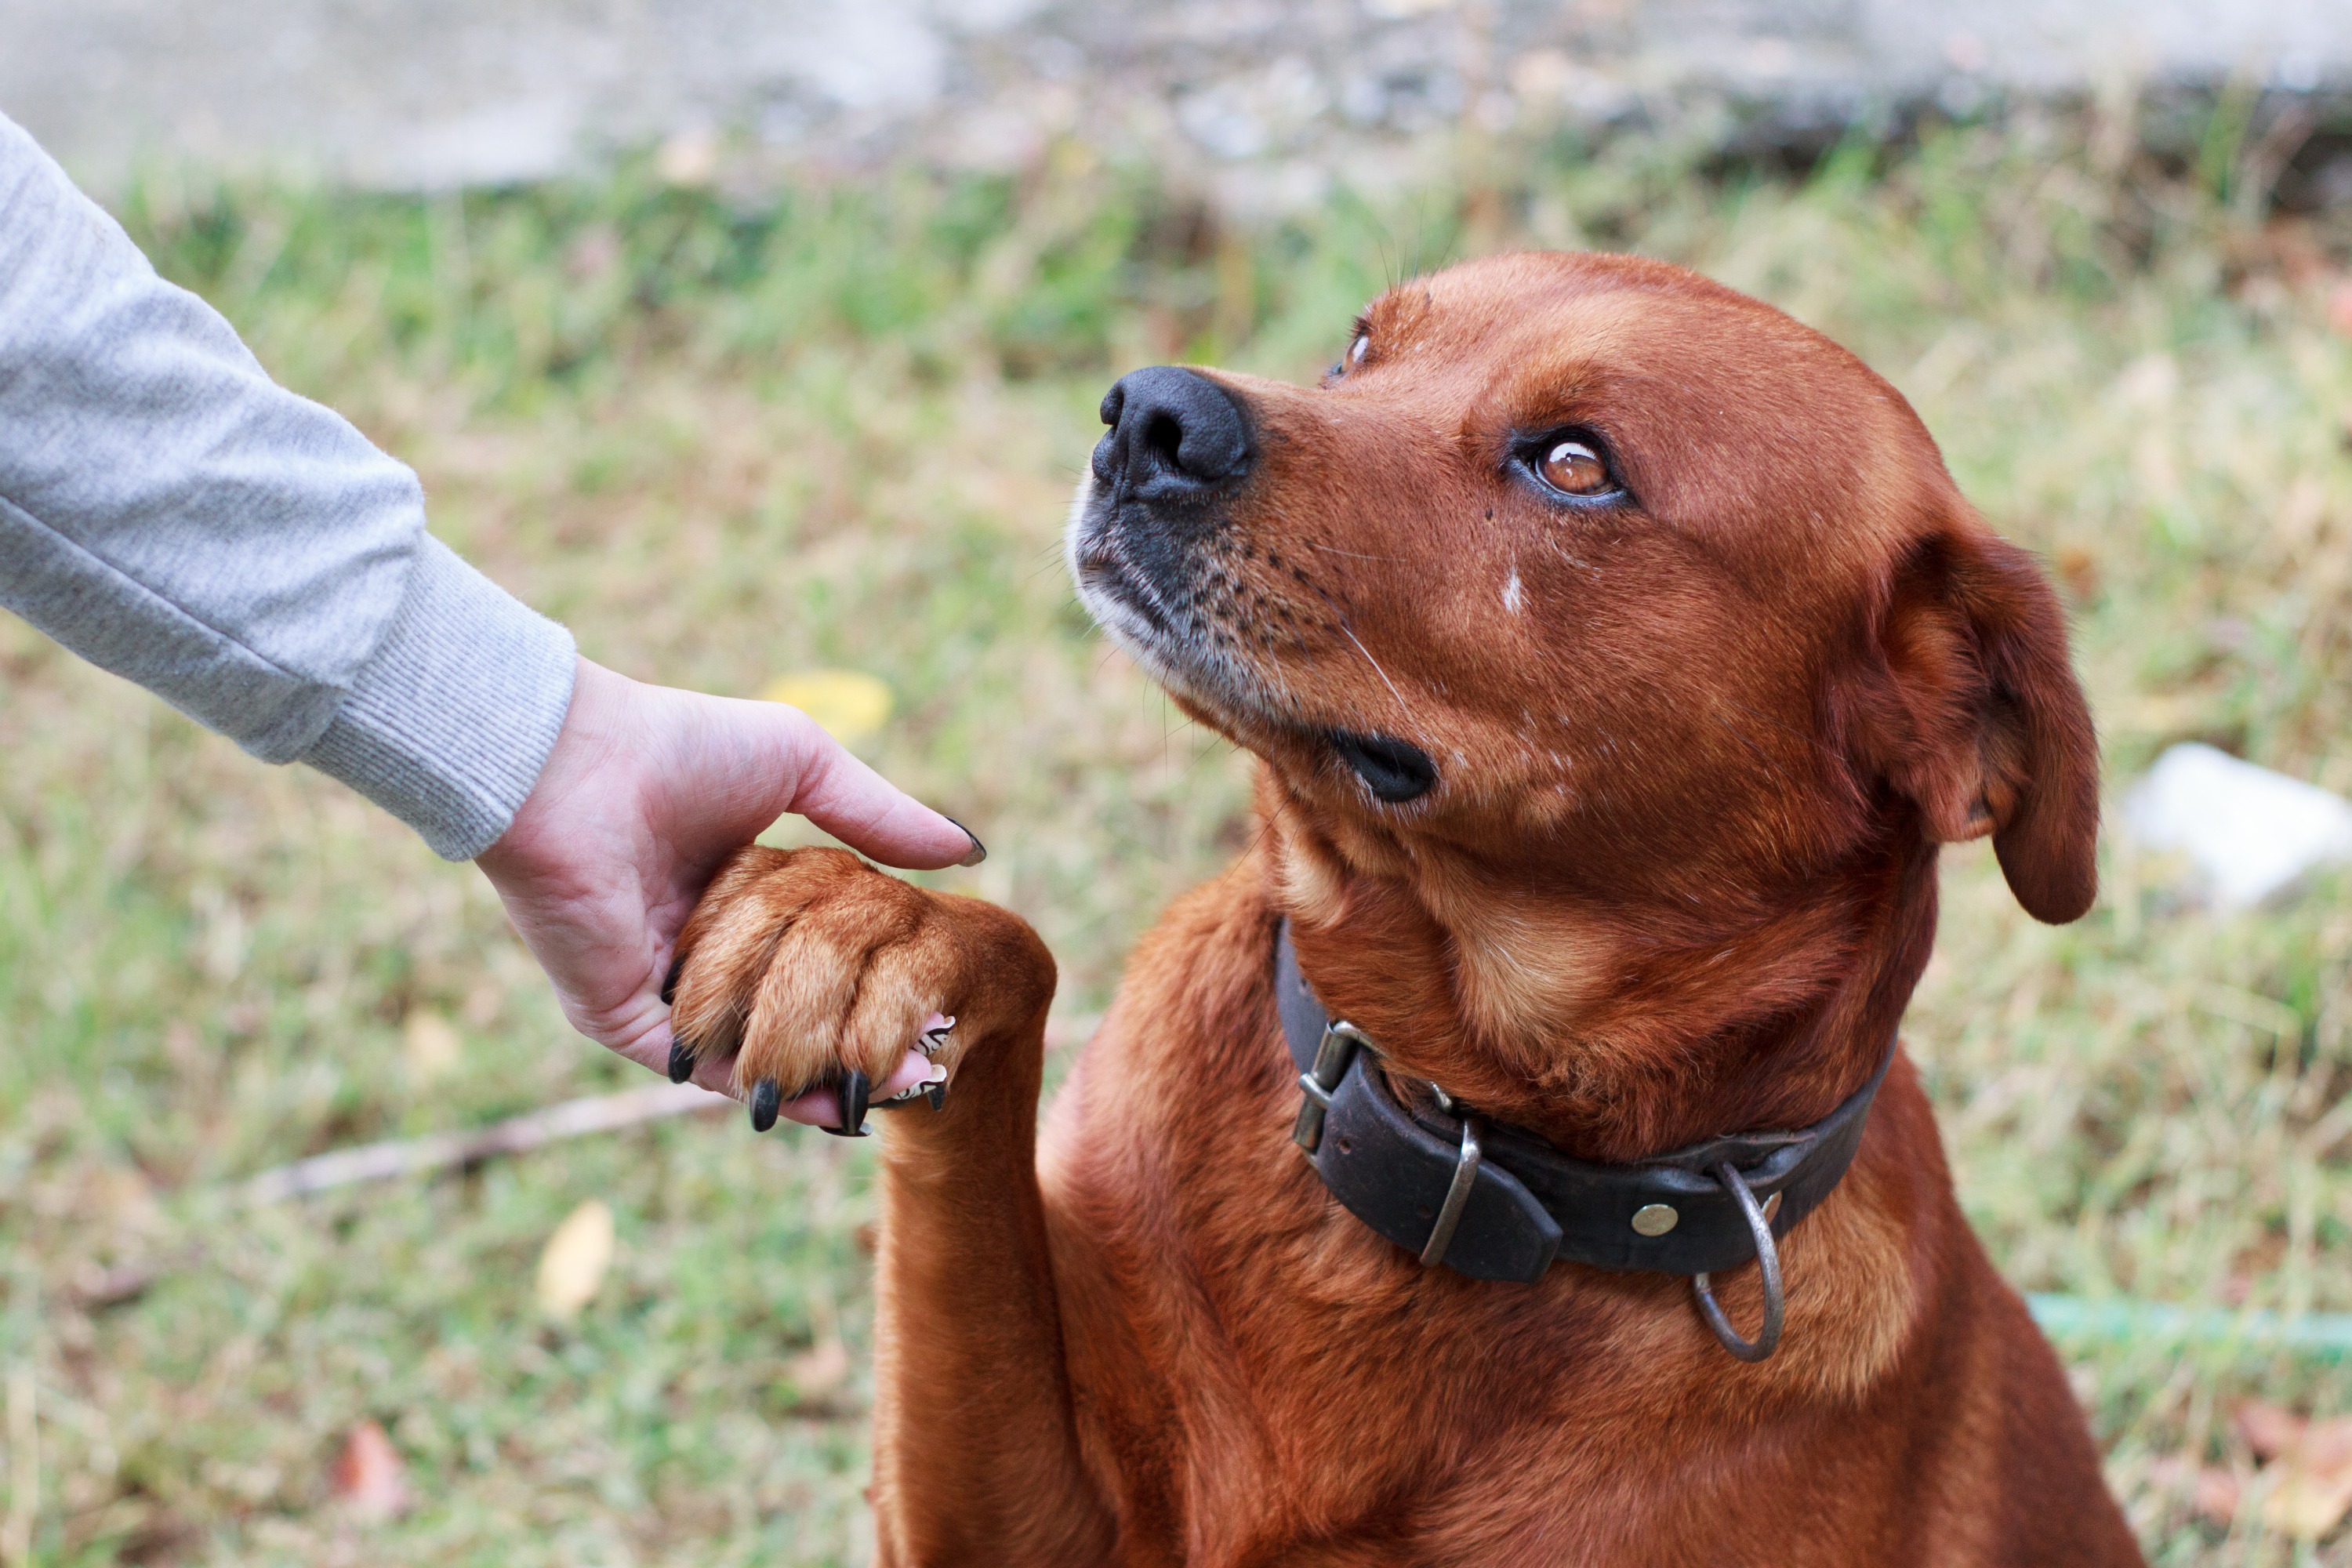 A brown-reddish dog with a black nose and black collar holds up his paw to his owner’s hand who is wearing a gray shirt.